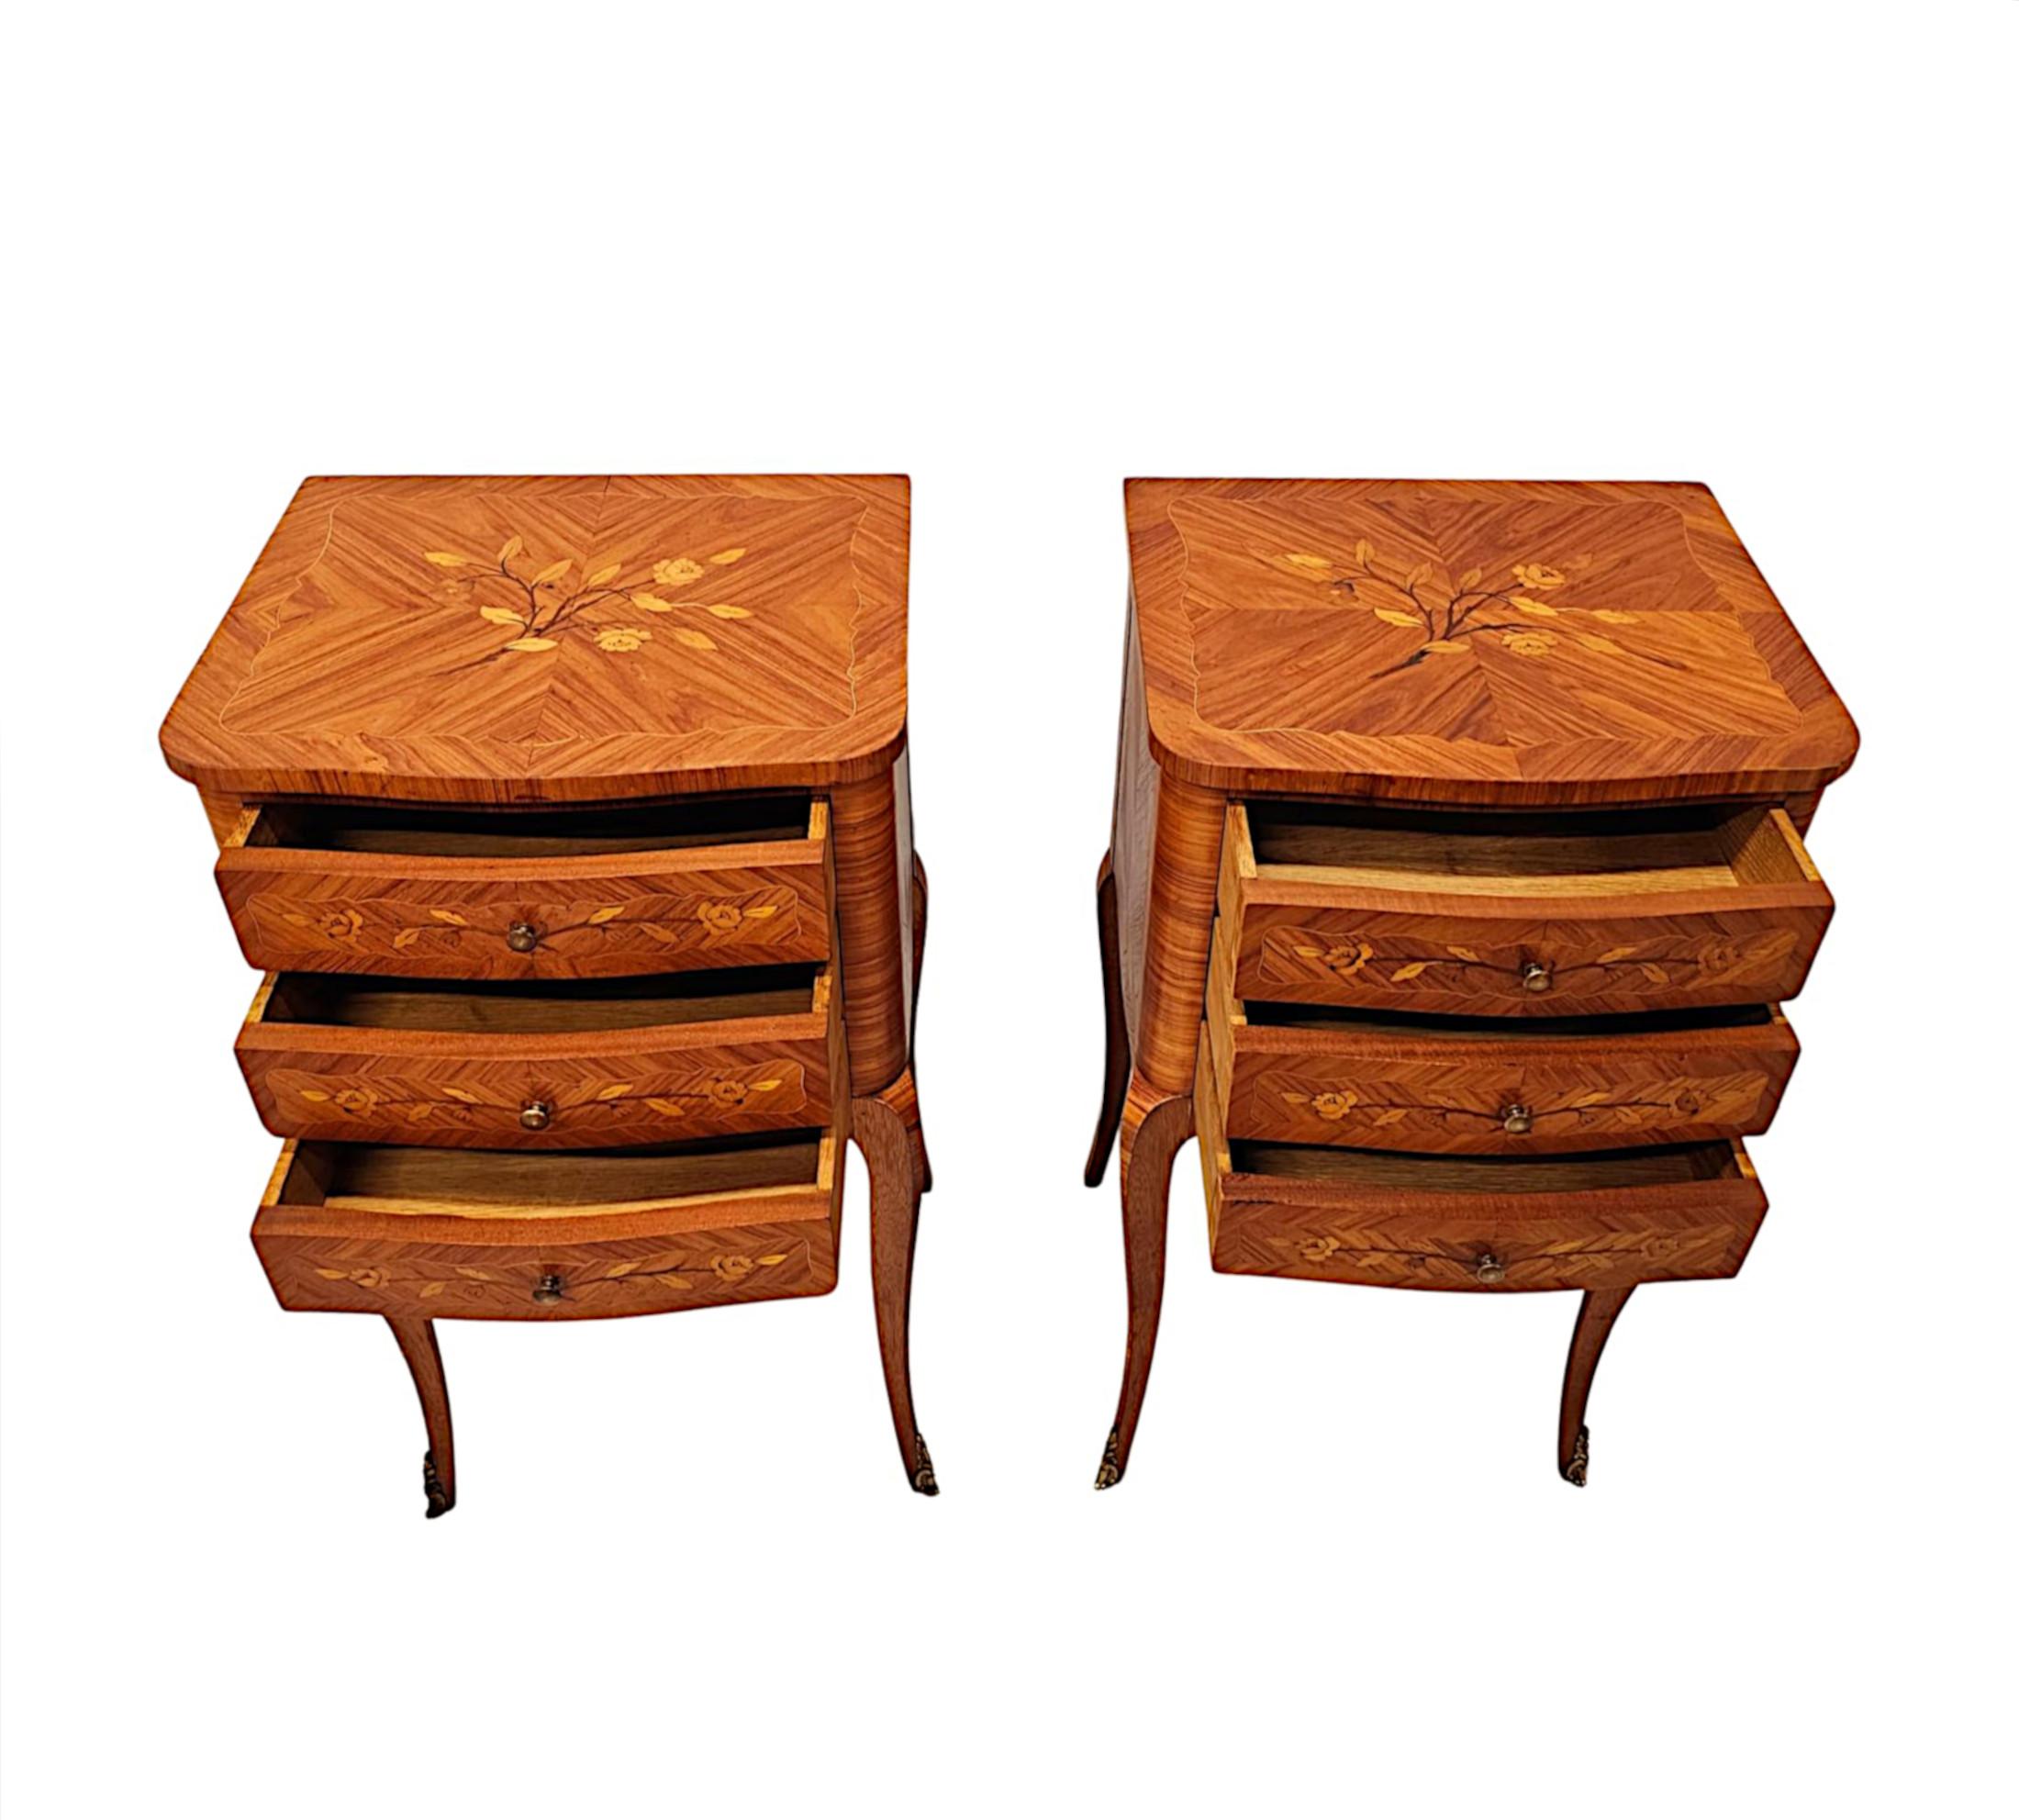 French A Fabulous Pair of Early 20th Century Marquetry Inlaid Bedside Tables or Chests For Sale